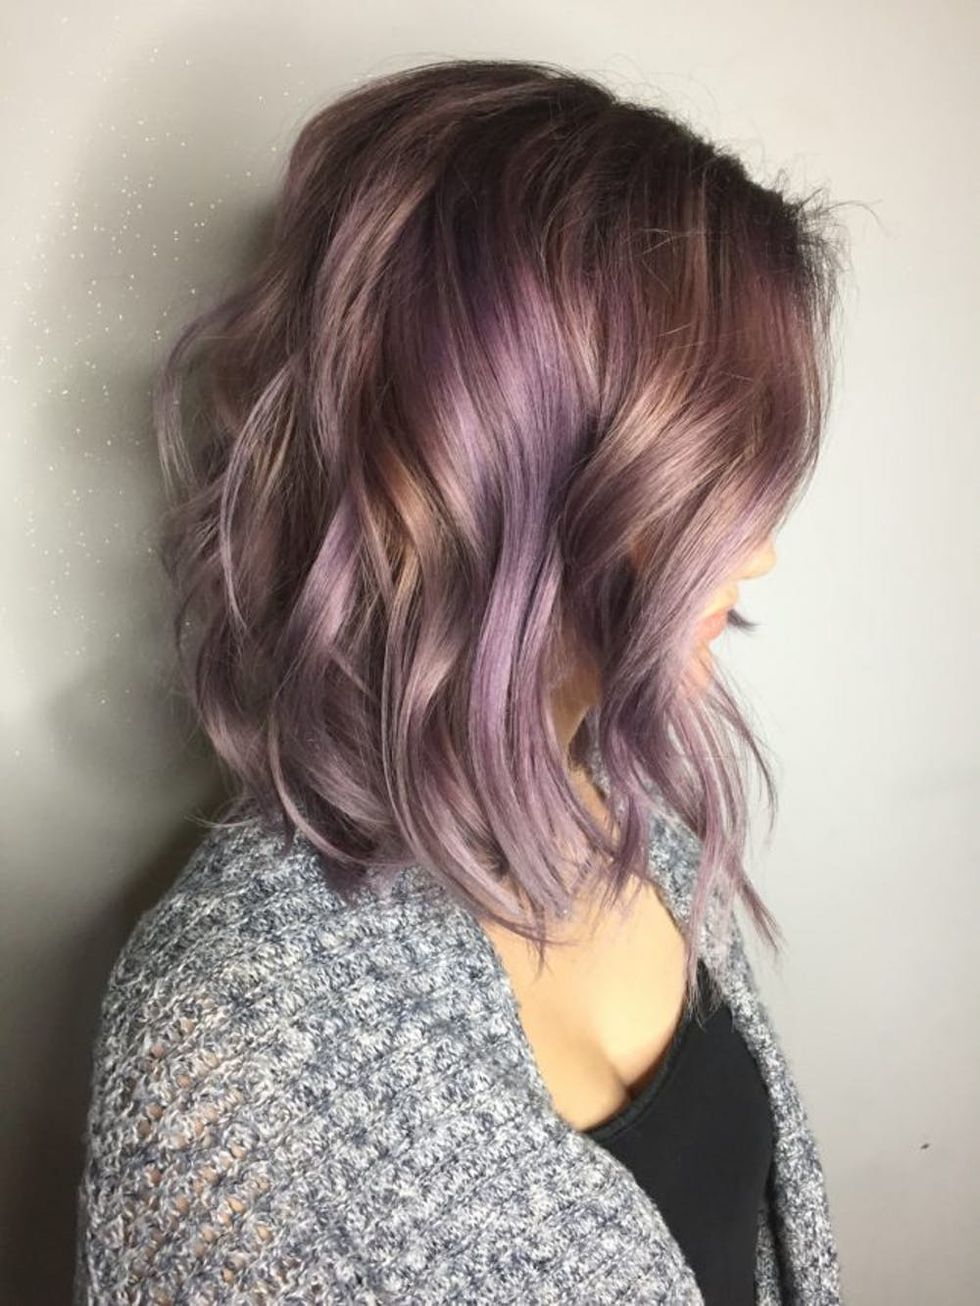 These 25 Purple Hairstyles Will Make You Want To Dye Your